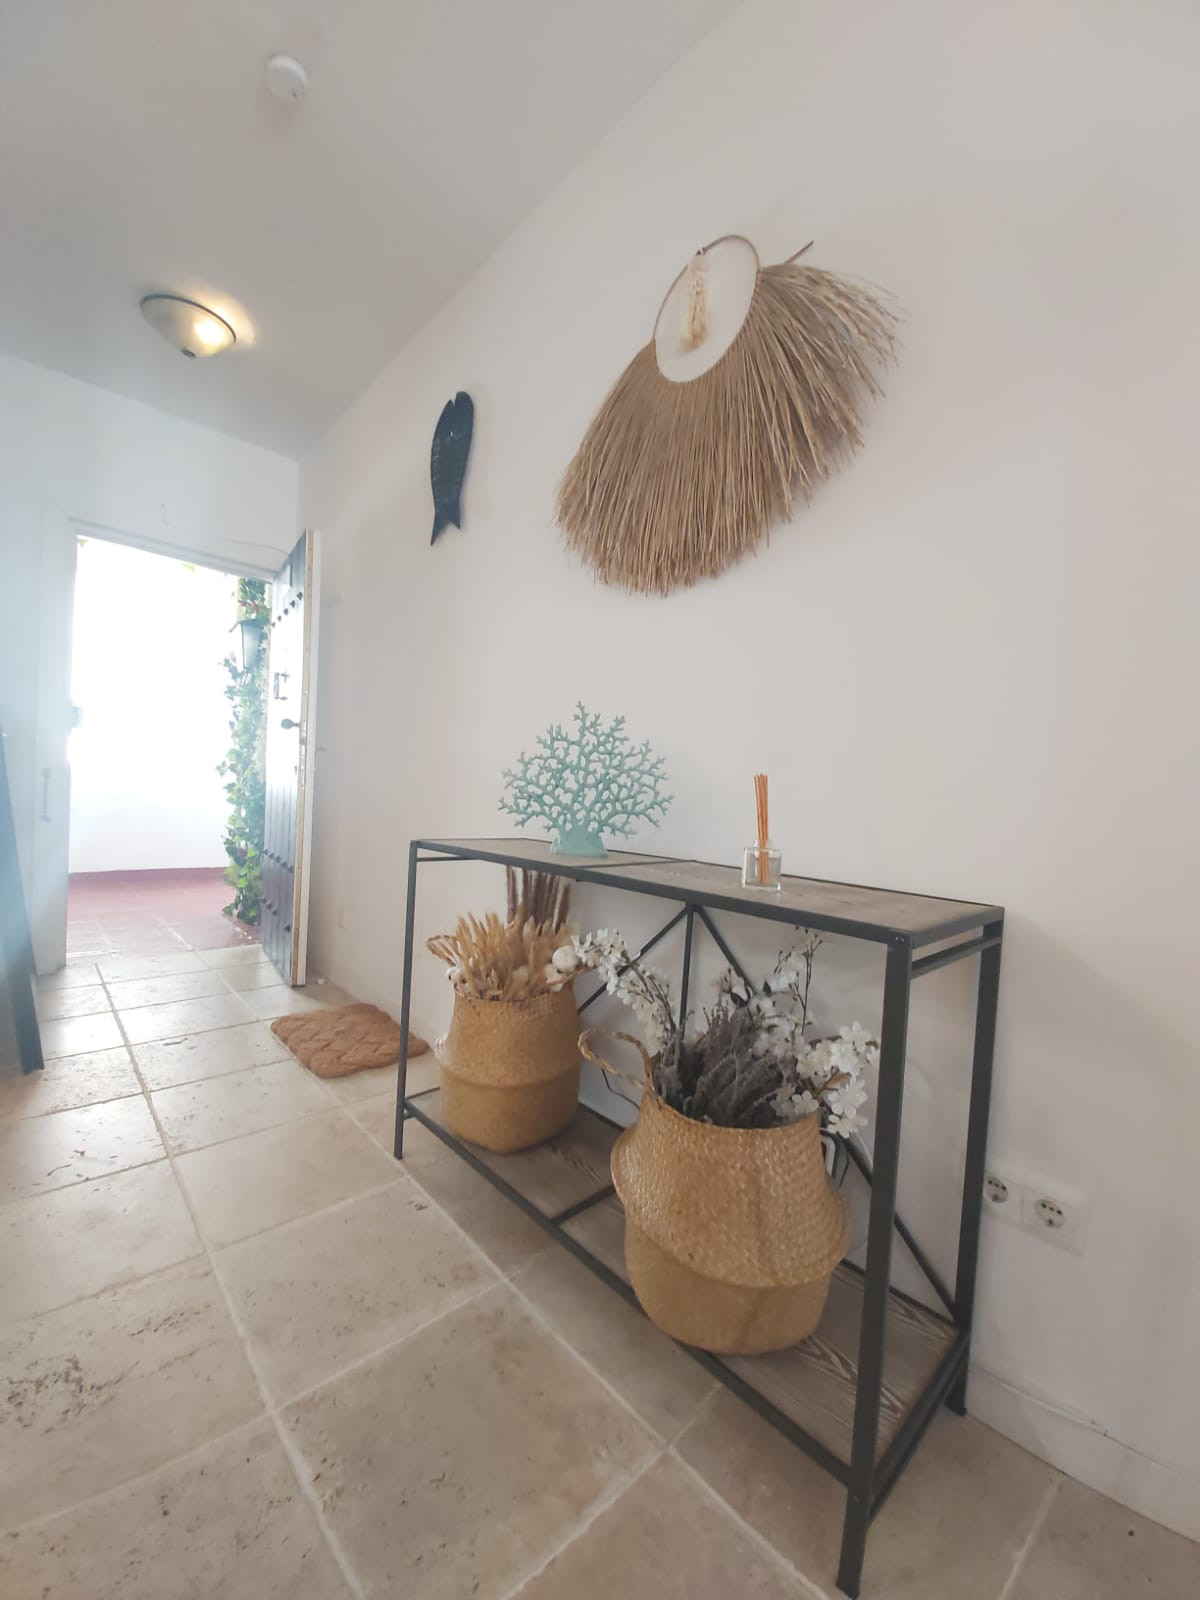 Beautiful 2-bedroom apartment for sale in the heart of Puerto Banús, with a tourist license for Air B&B and booking.com.